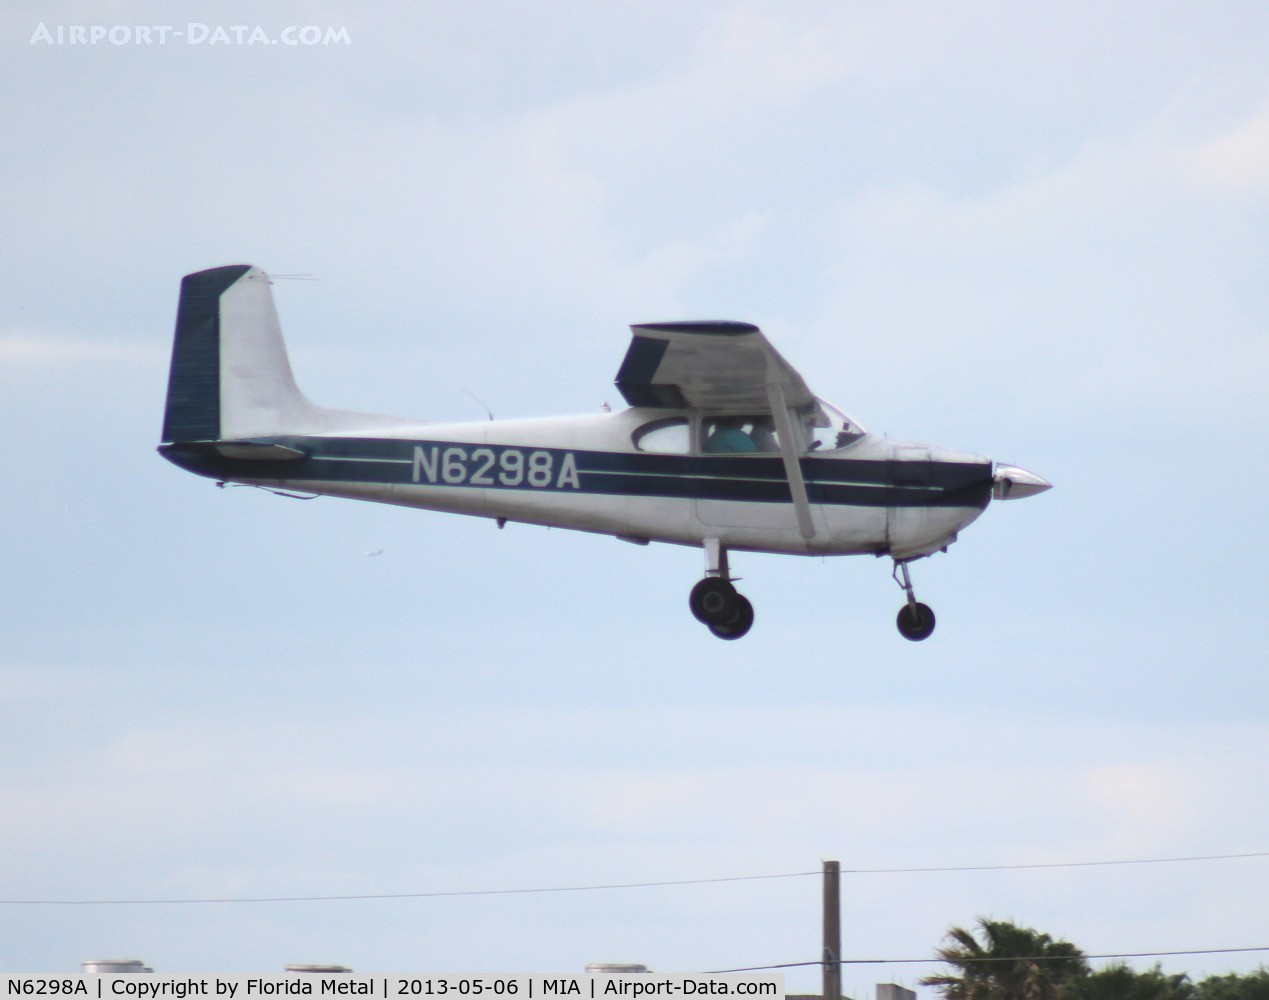 N6298A, 1956 Cessna 182 Skylane C/N 33098, Really strange to see this Cessna 182 land on Runway 9 at MIA.  Its not unusual to see GA aircraft land at MIA, but they usually land on 8L